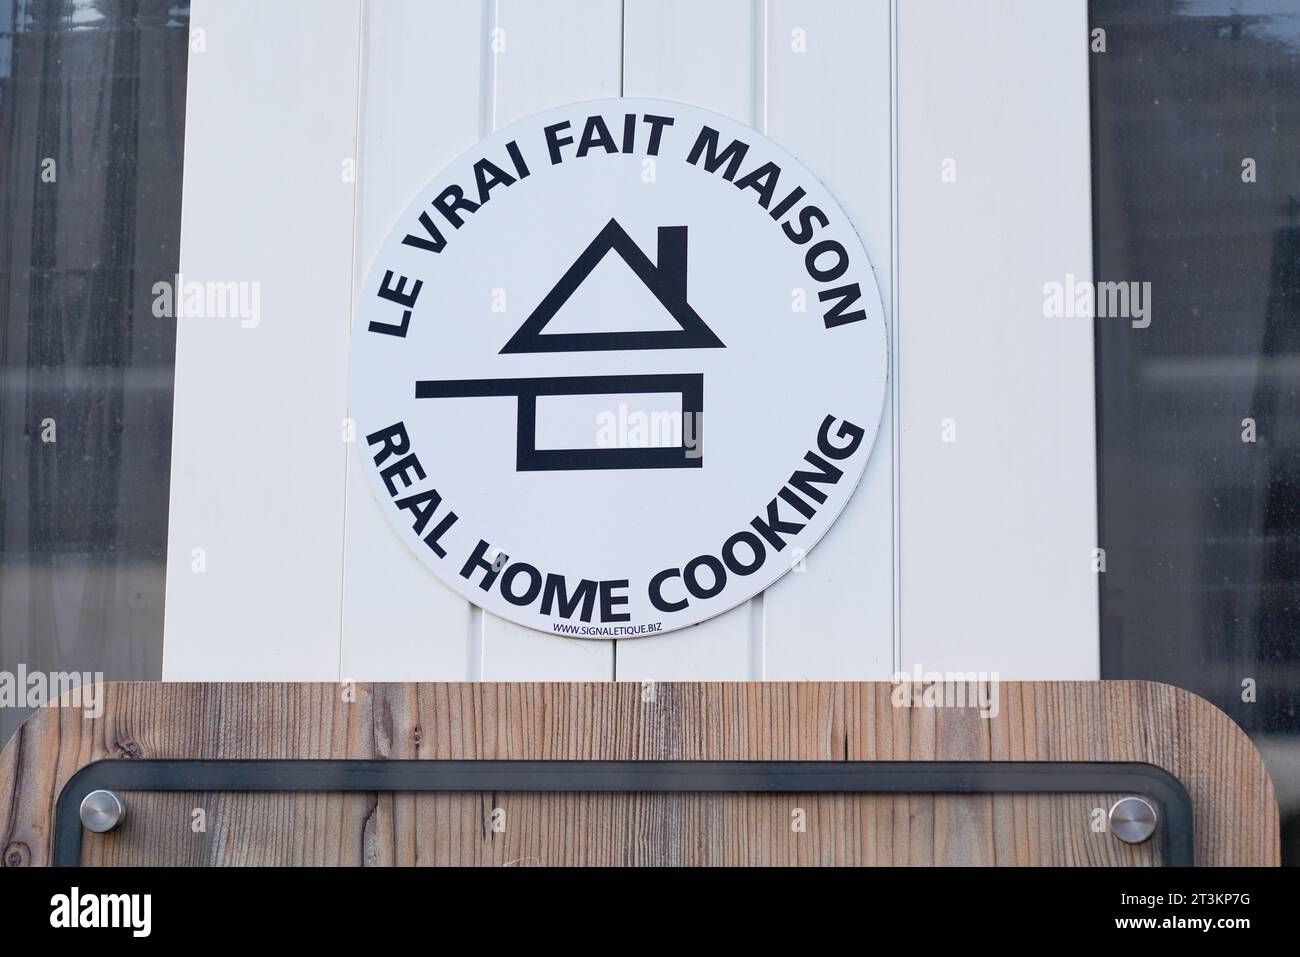 Bordeaux , France - 10 19 2023 : le vrai fait maison logo text and sign brand label of French artisan producer quality real home cooking Stock Photo